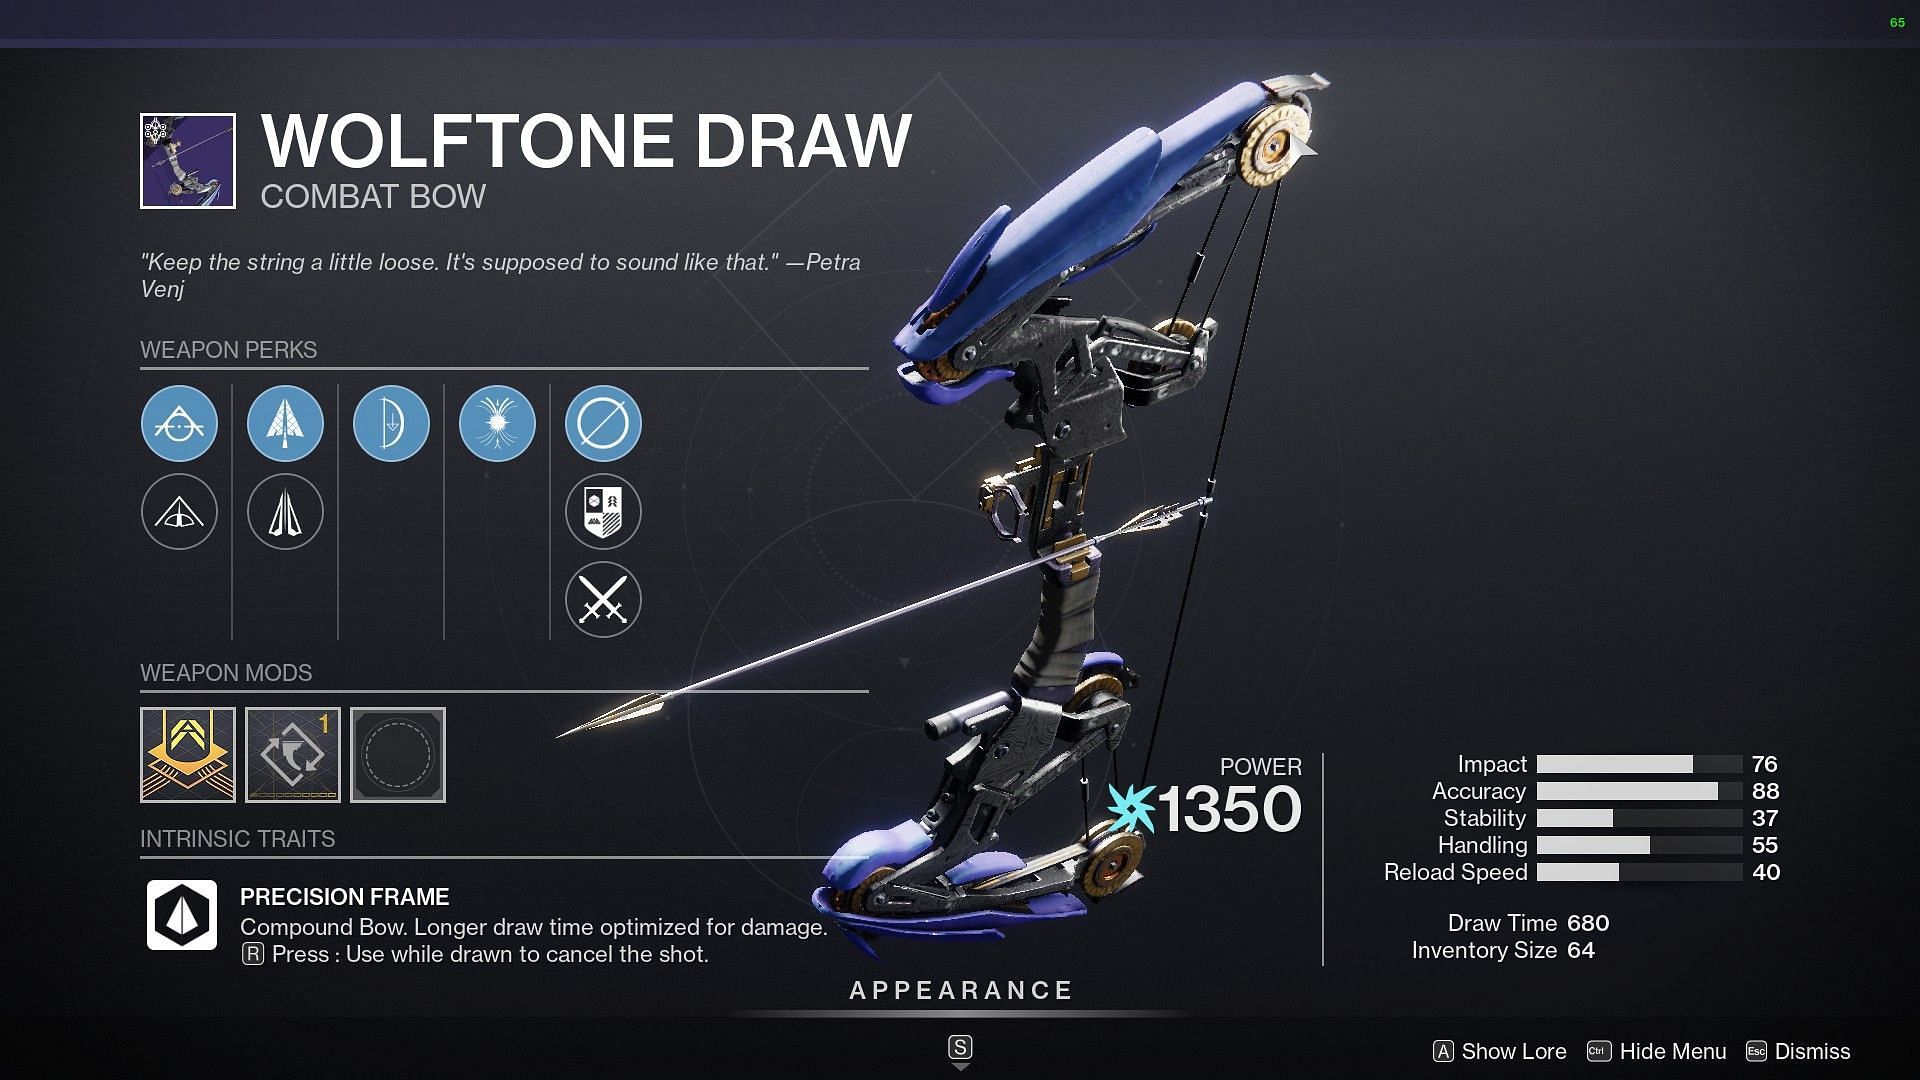 Wolftone Draw Bow on Xur for sale (Image via Destiny 2)